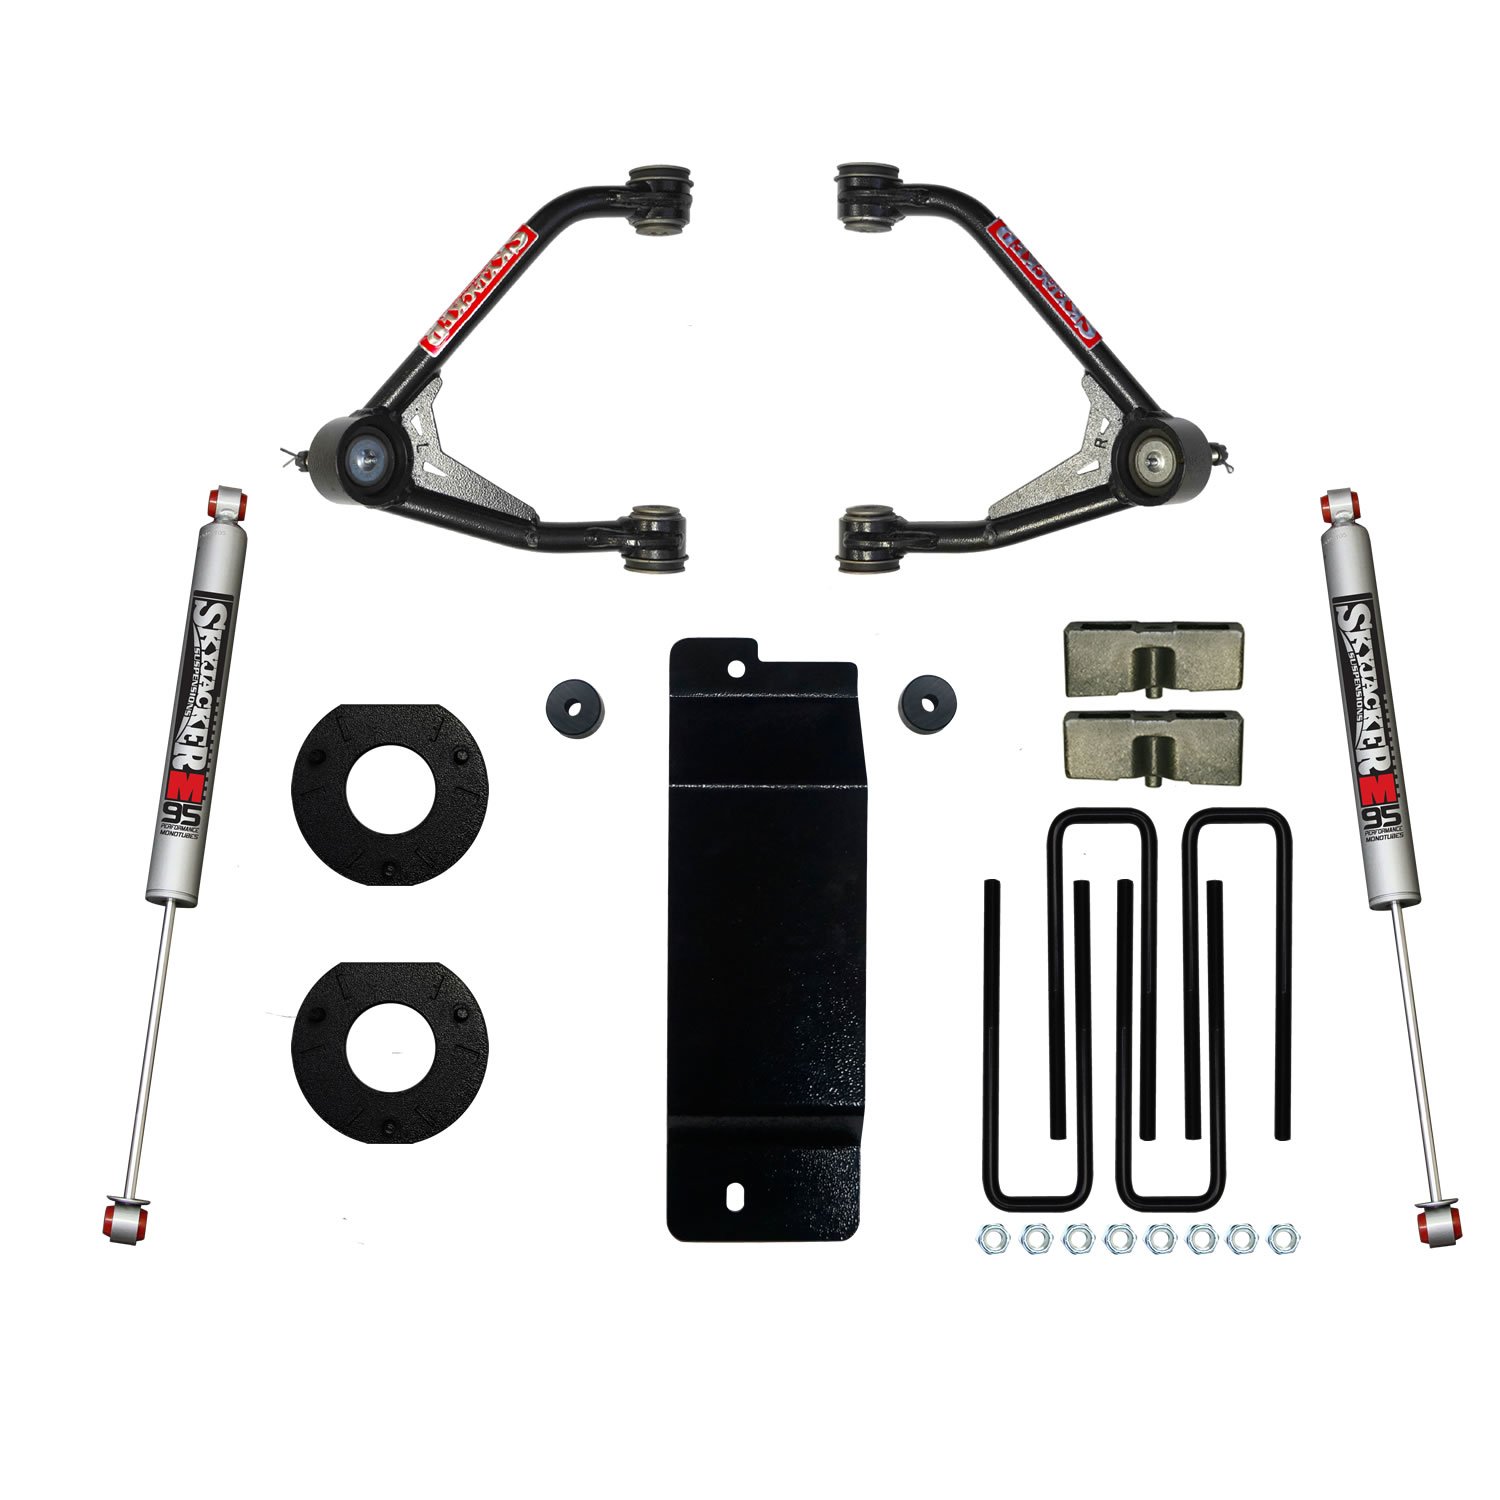 3.500-4.000 In. Upper Control Arm Lift Kit with M9500 Rear Shocks